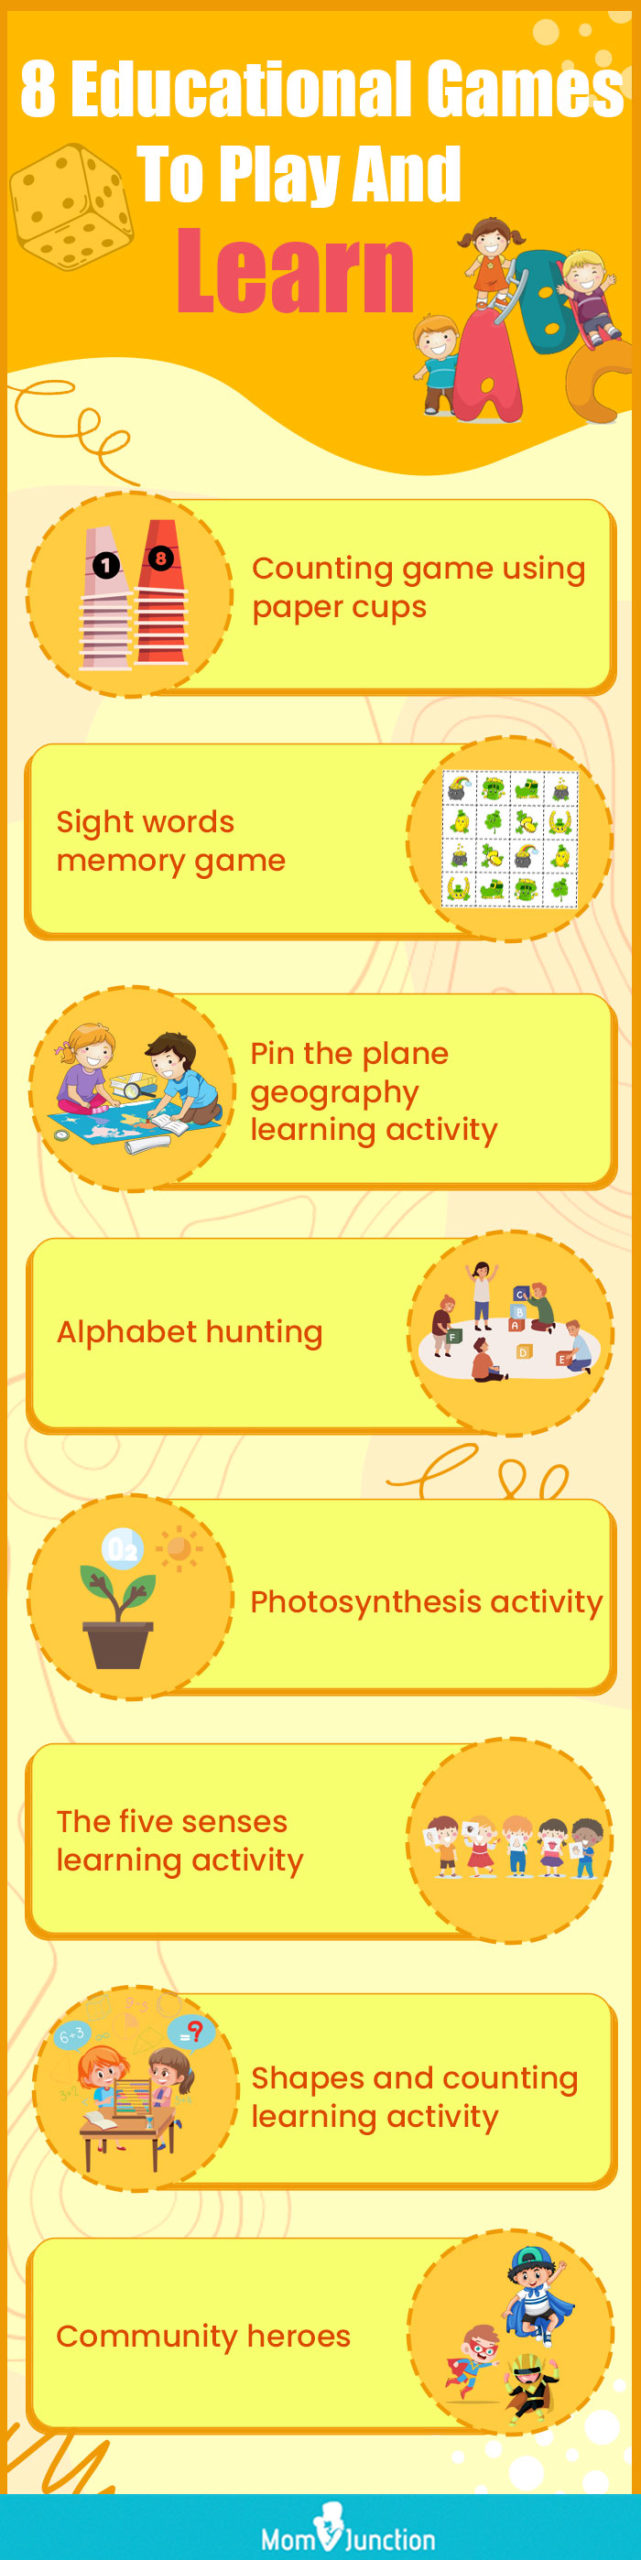 8 educational games to play and learn (infographic)